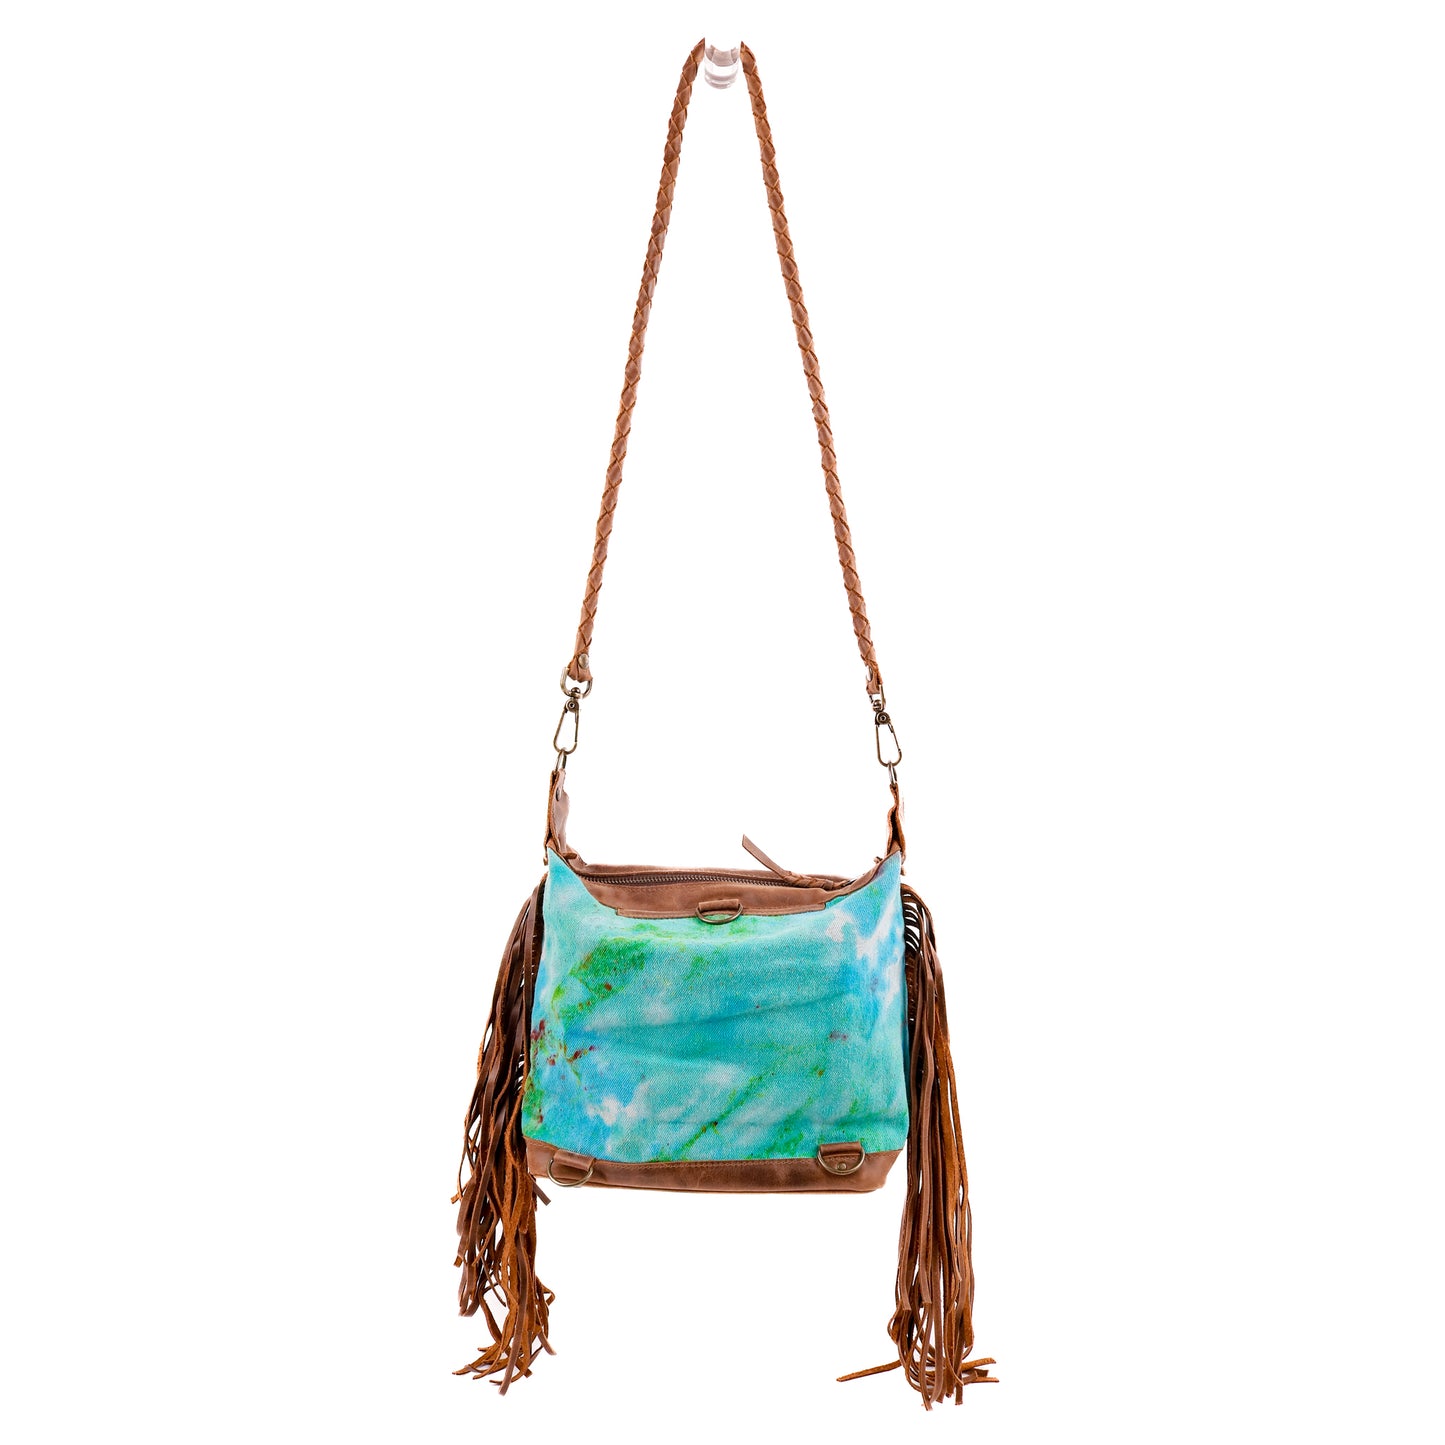 BEATRIZ MINI CONVERTIBLE DAY BAG WITH FRINGE - UPCYCLED DENIM - TIE DYE - CAOBA - NO. 10009